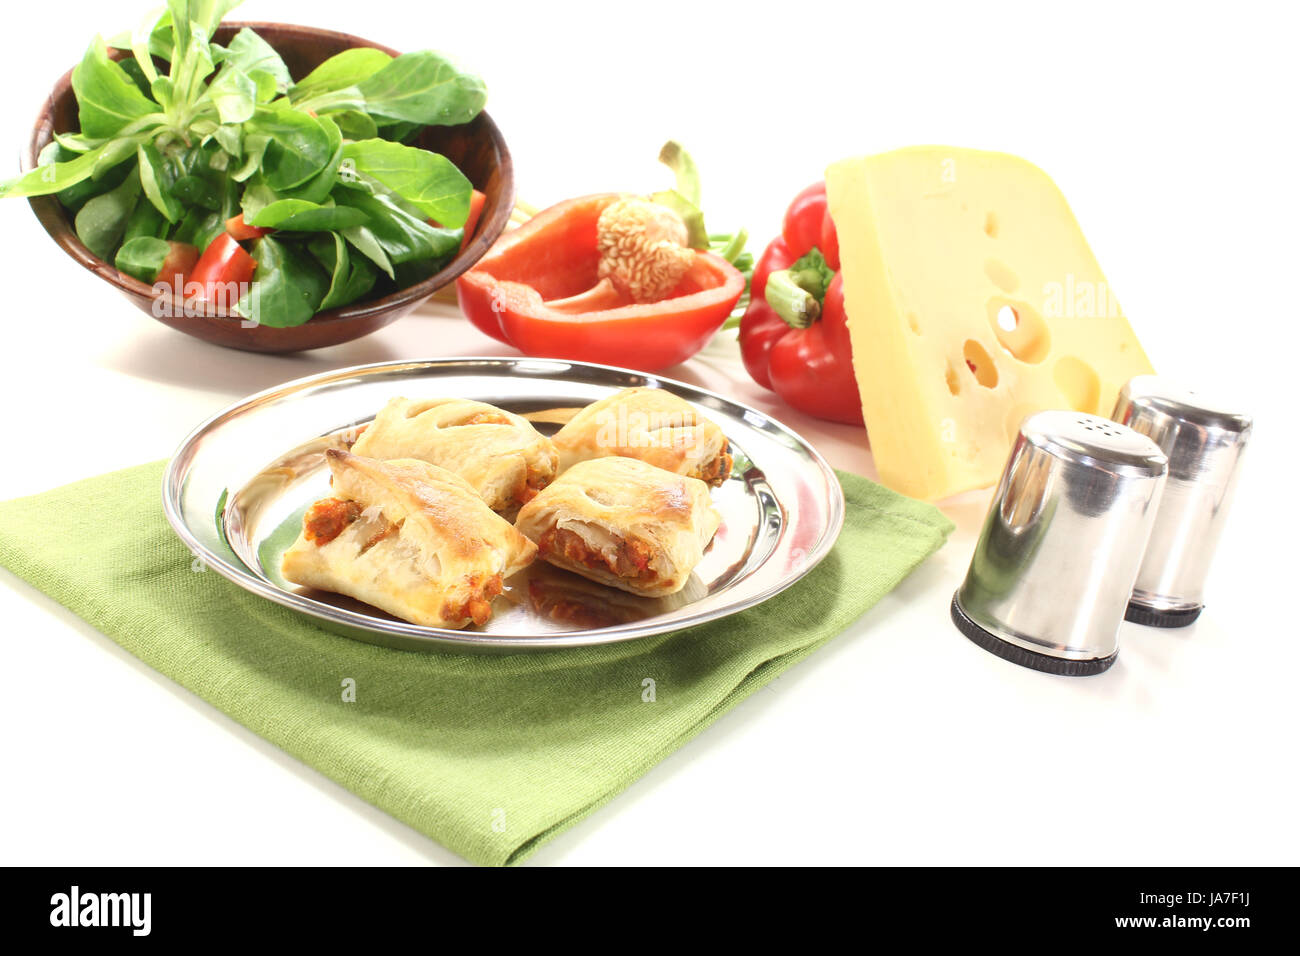 pastry, paprika, peppers, cheese, onions, lamb's lettuce, food, aliment, Stock Photo